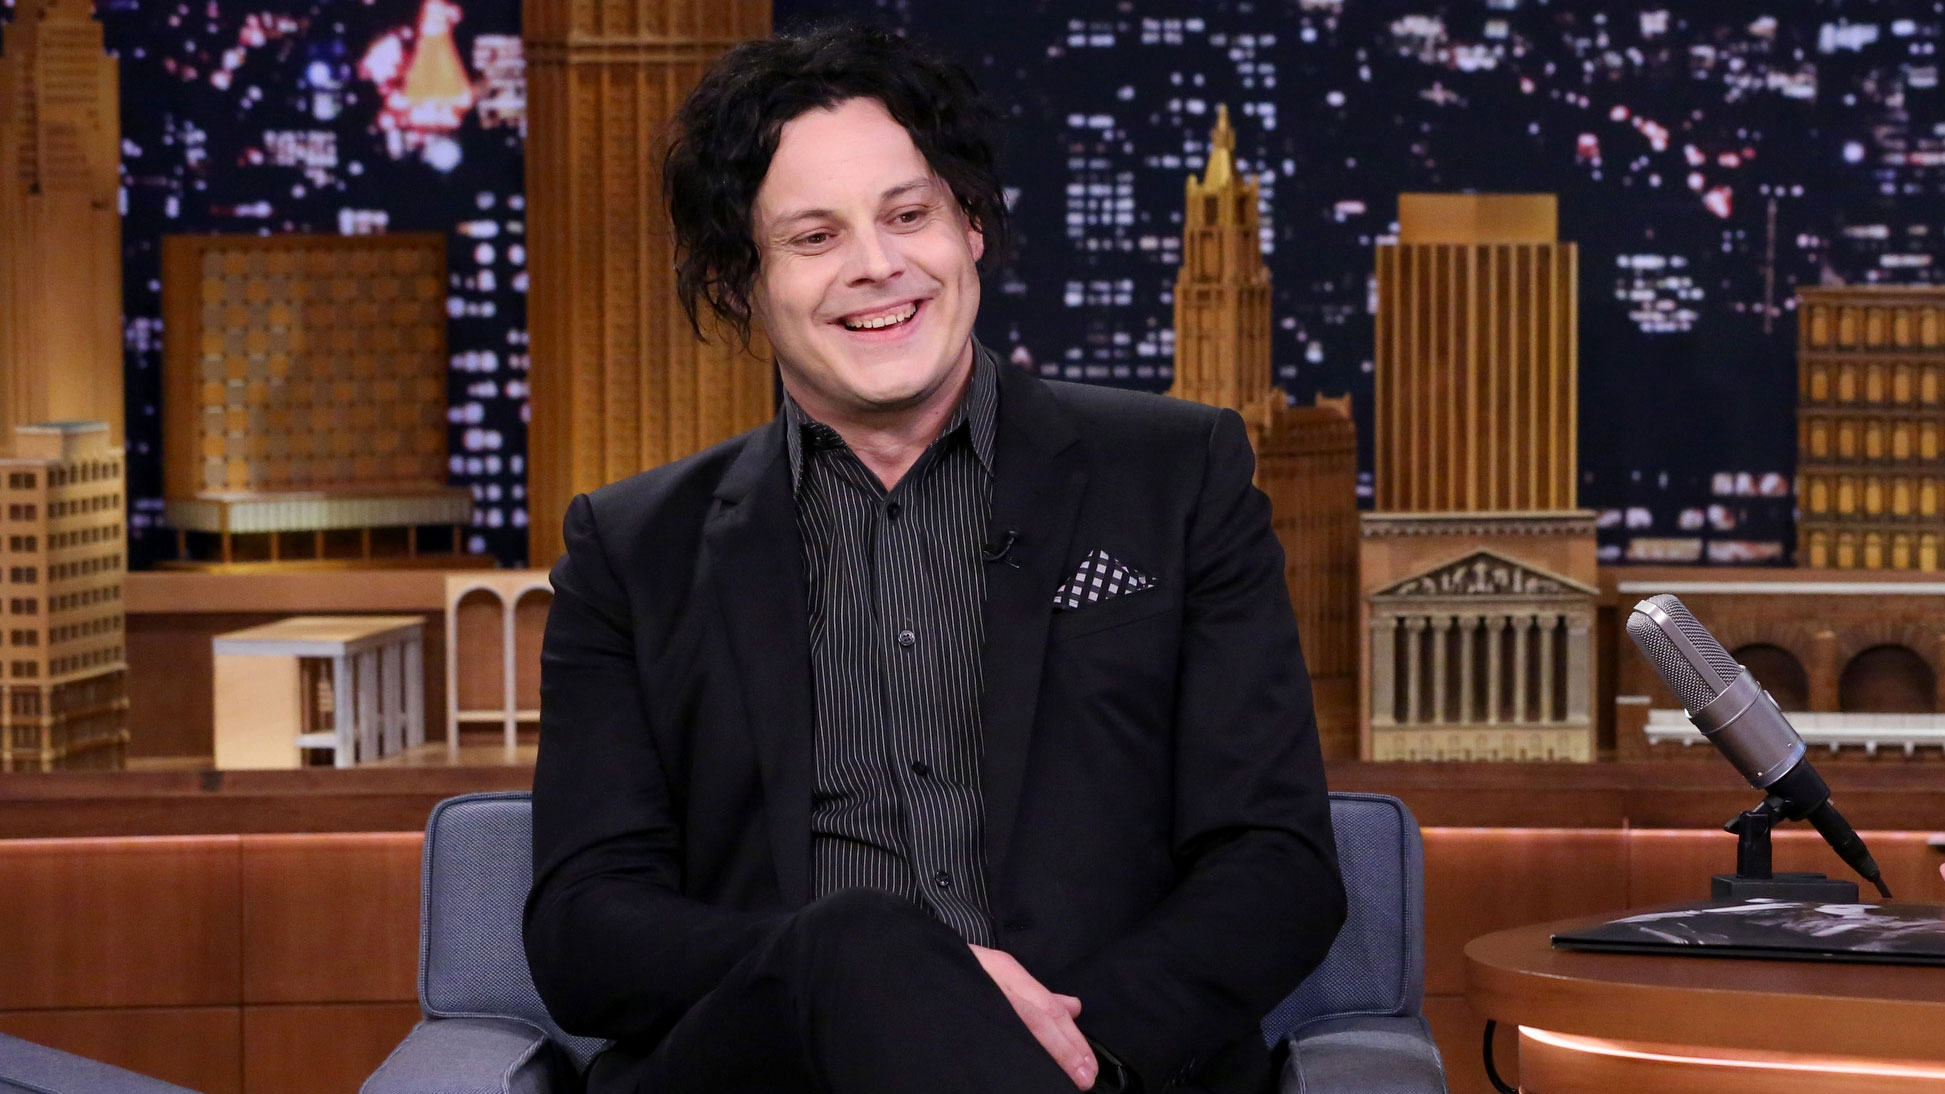 Jack White. Acoustic Recordings. The Tonight Show with Jimmy Fallon. Cúsica Plus